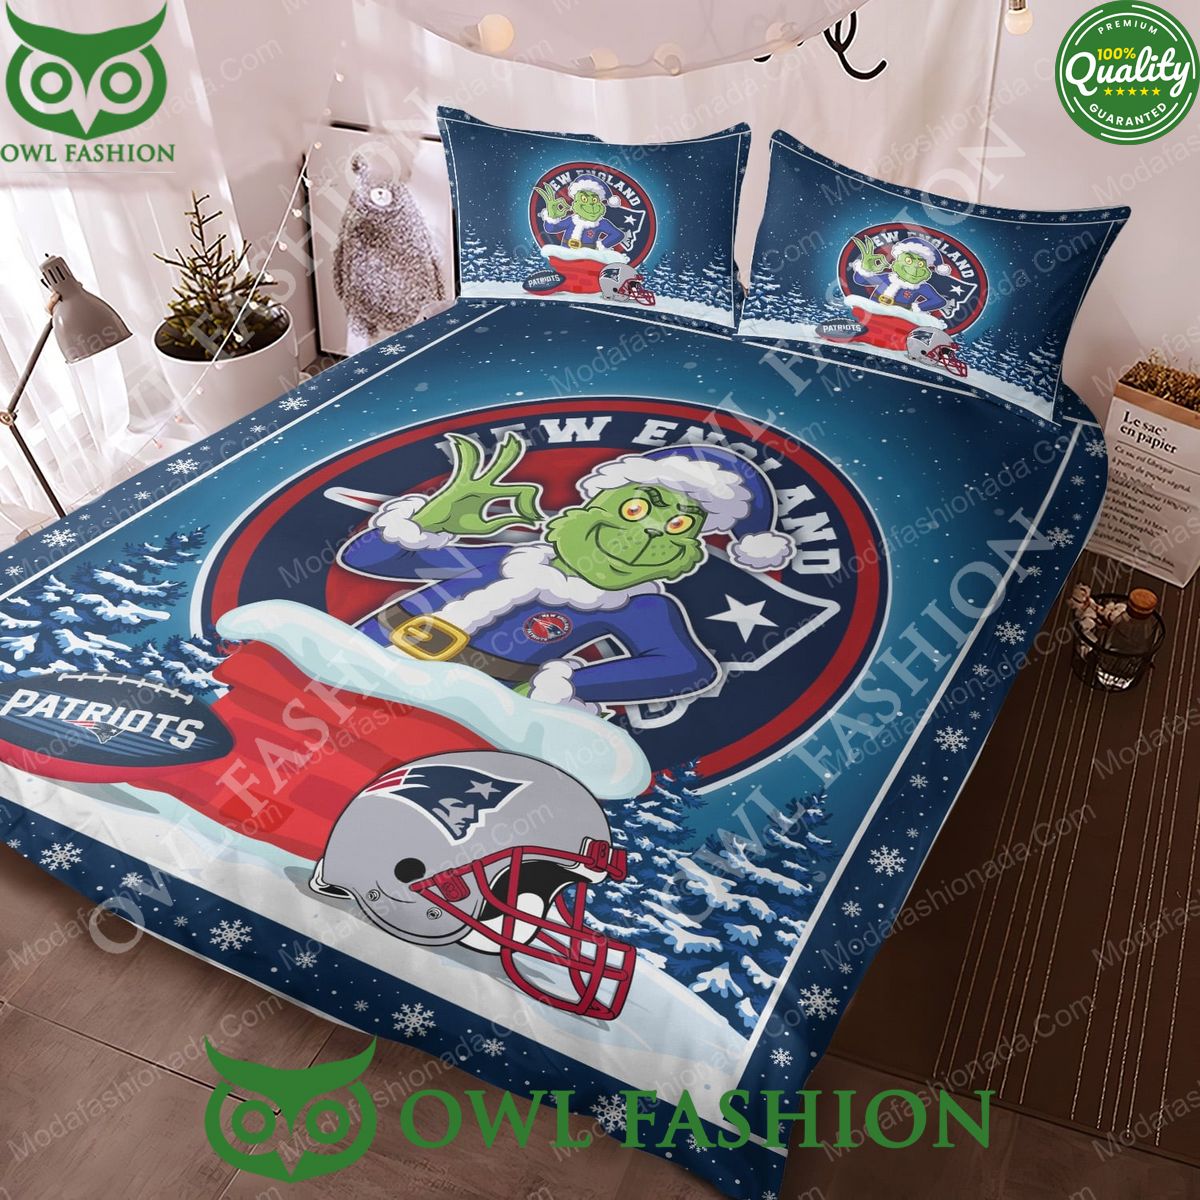 The Grinch NFL New England Patriots Christmas Bedding Sets Cool look bro